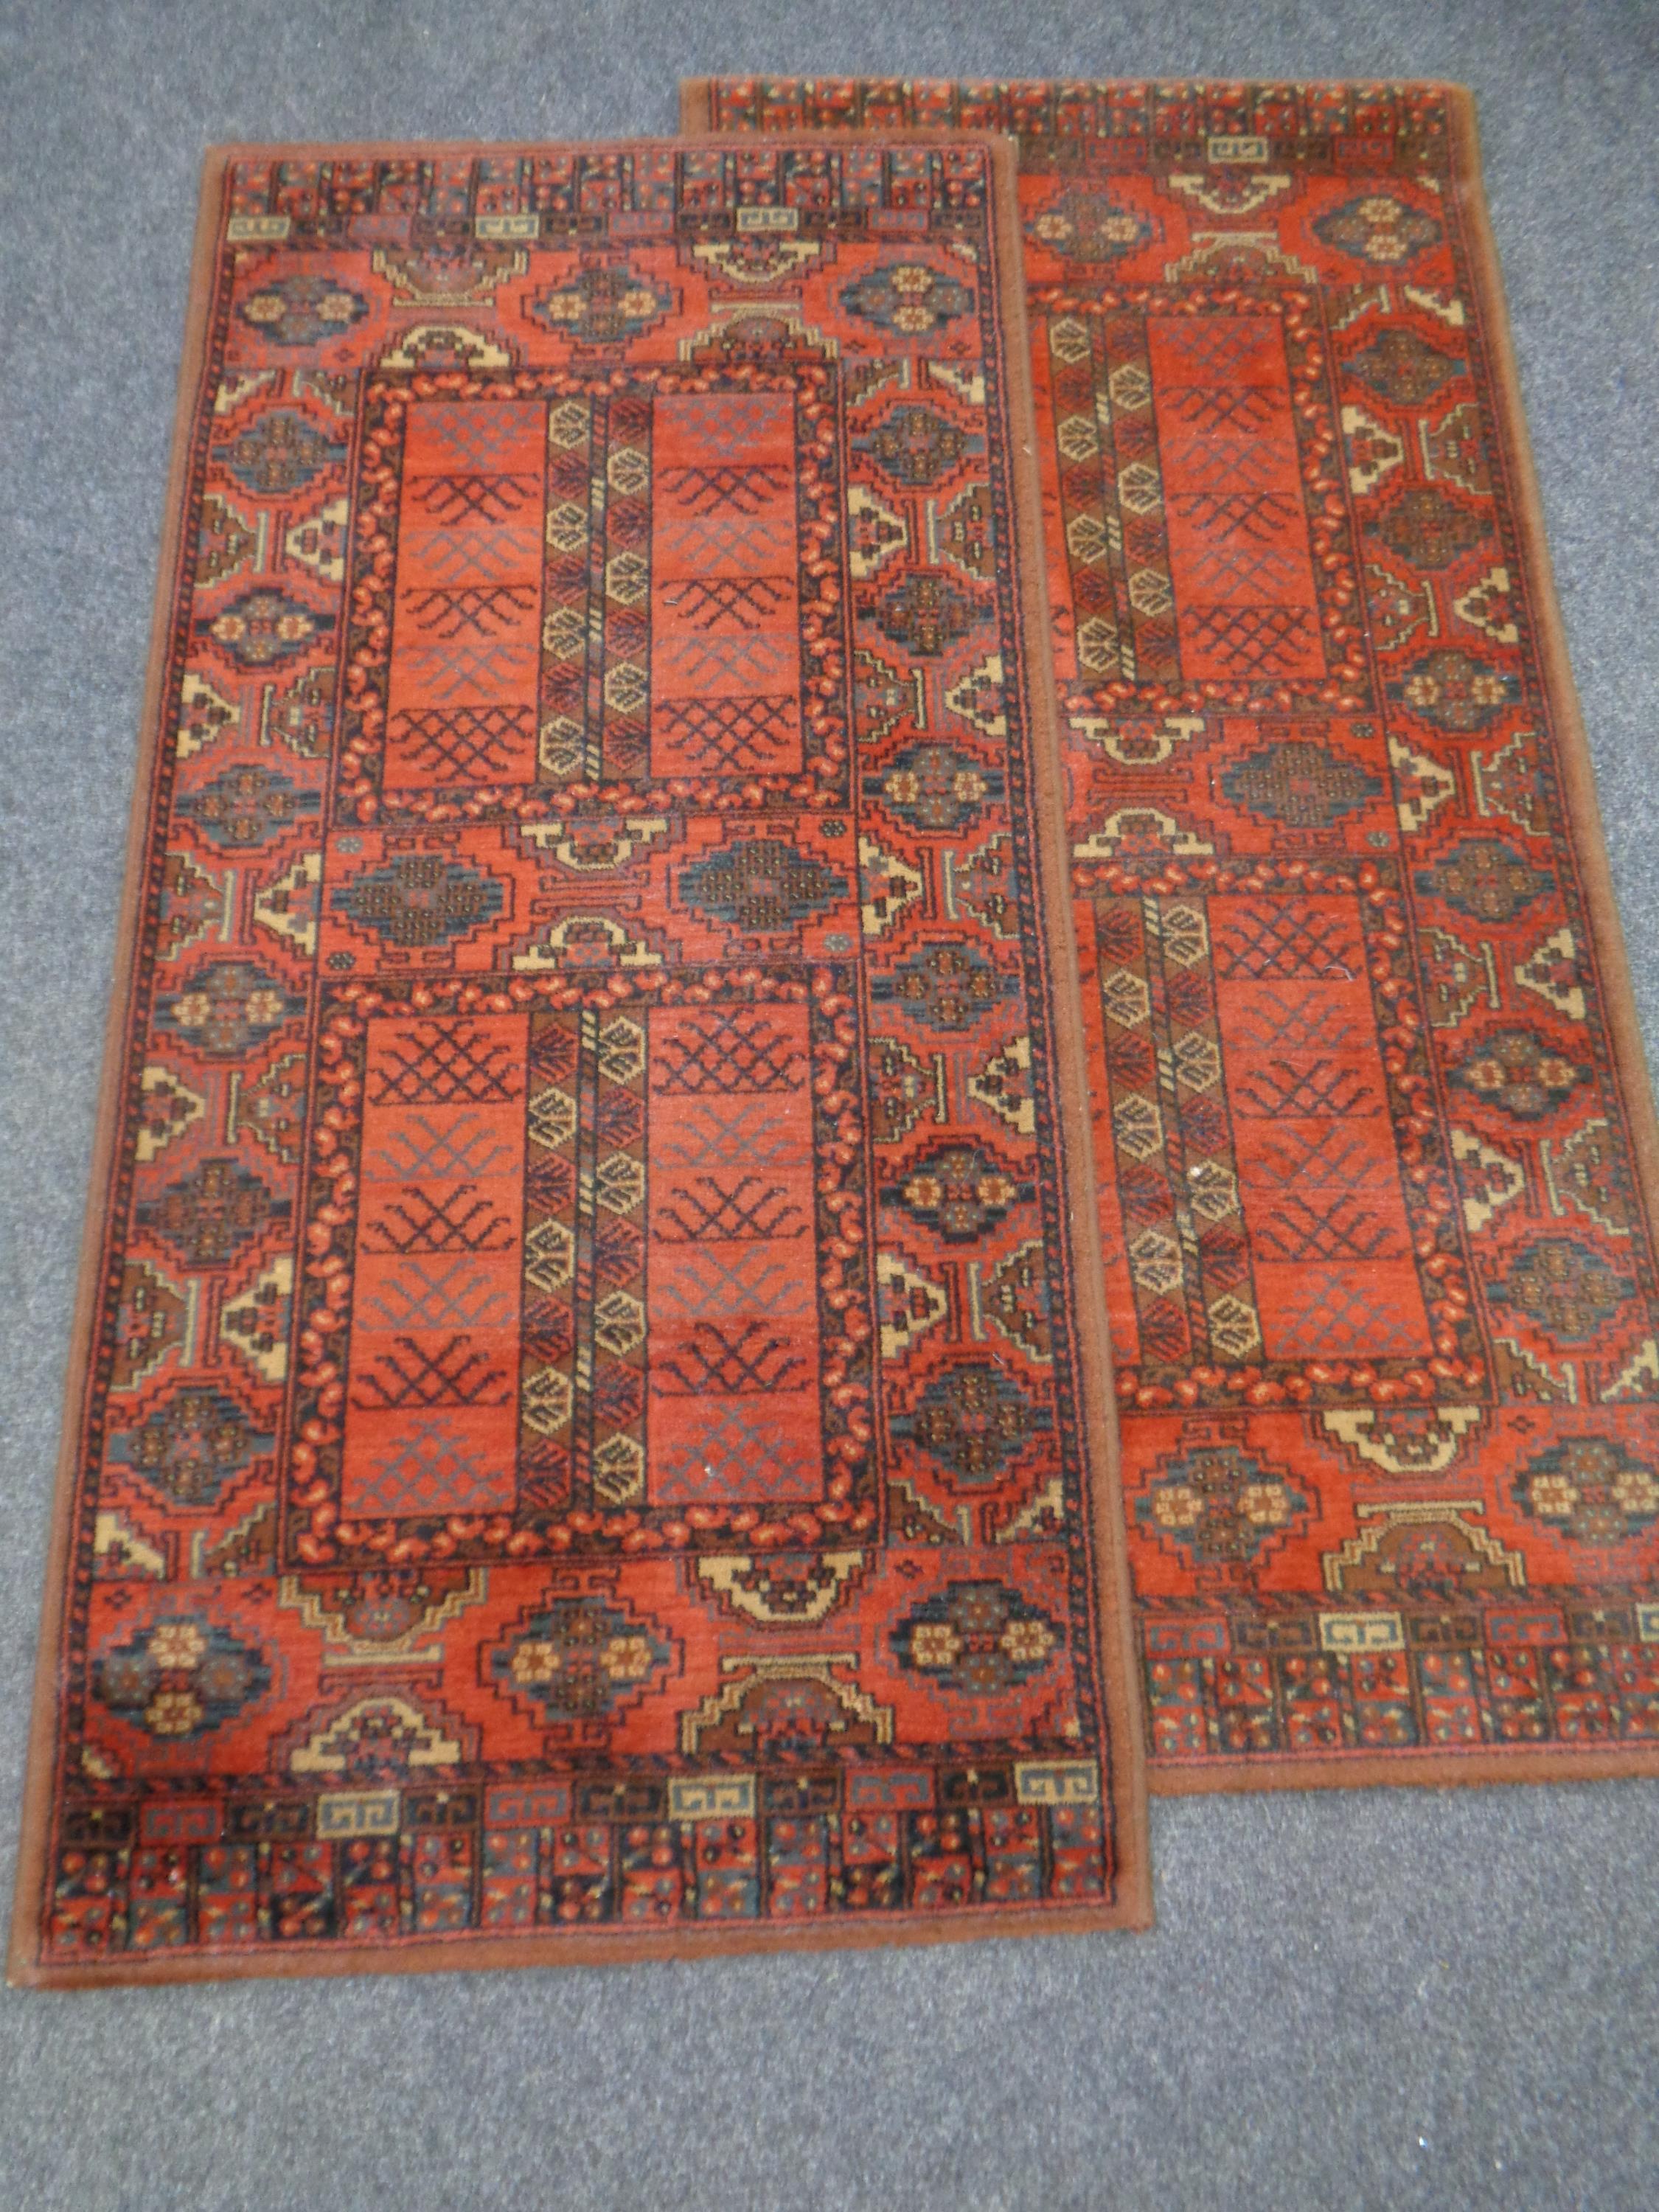 A machined Royal Keshan Persian design woolen carpet together with two Persian design runners - Image 2 of 2